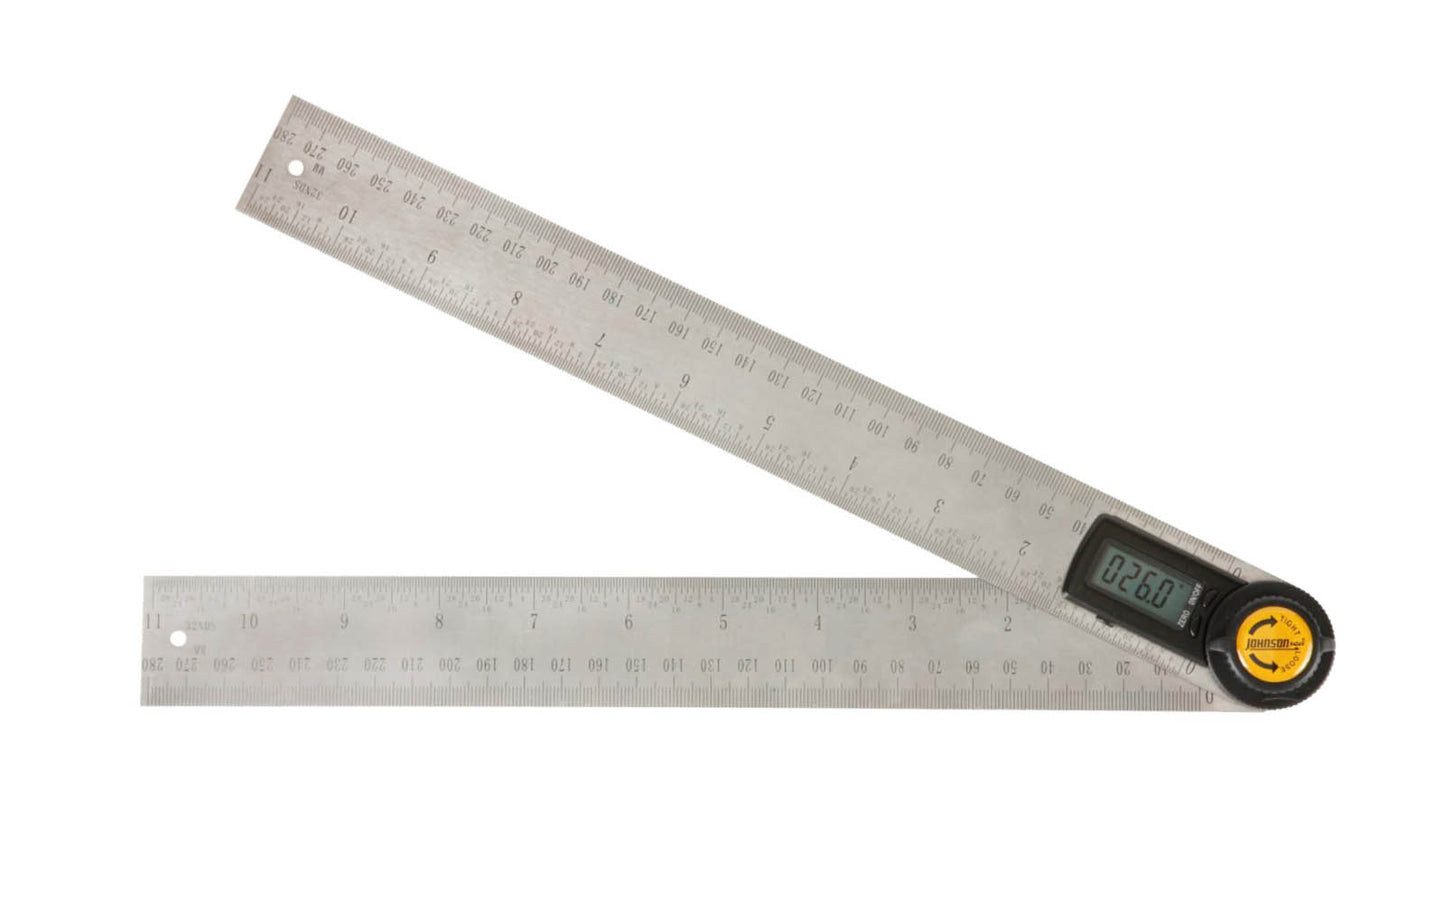 Check & transfer angle measurements & have a ready straight edge all in one tool. Compact 11" digital angle locator & ruler is made of durable stainless steel. The digital angle locator displays measurements digitally in degrees on an easy-to-read LCD display. Johnson Level Model 1888-1100. 1/32nds & mm graduations.